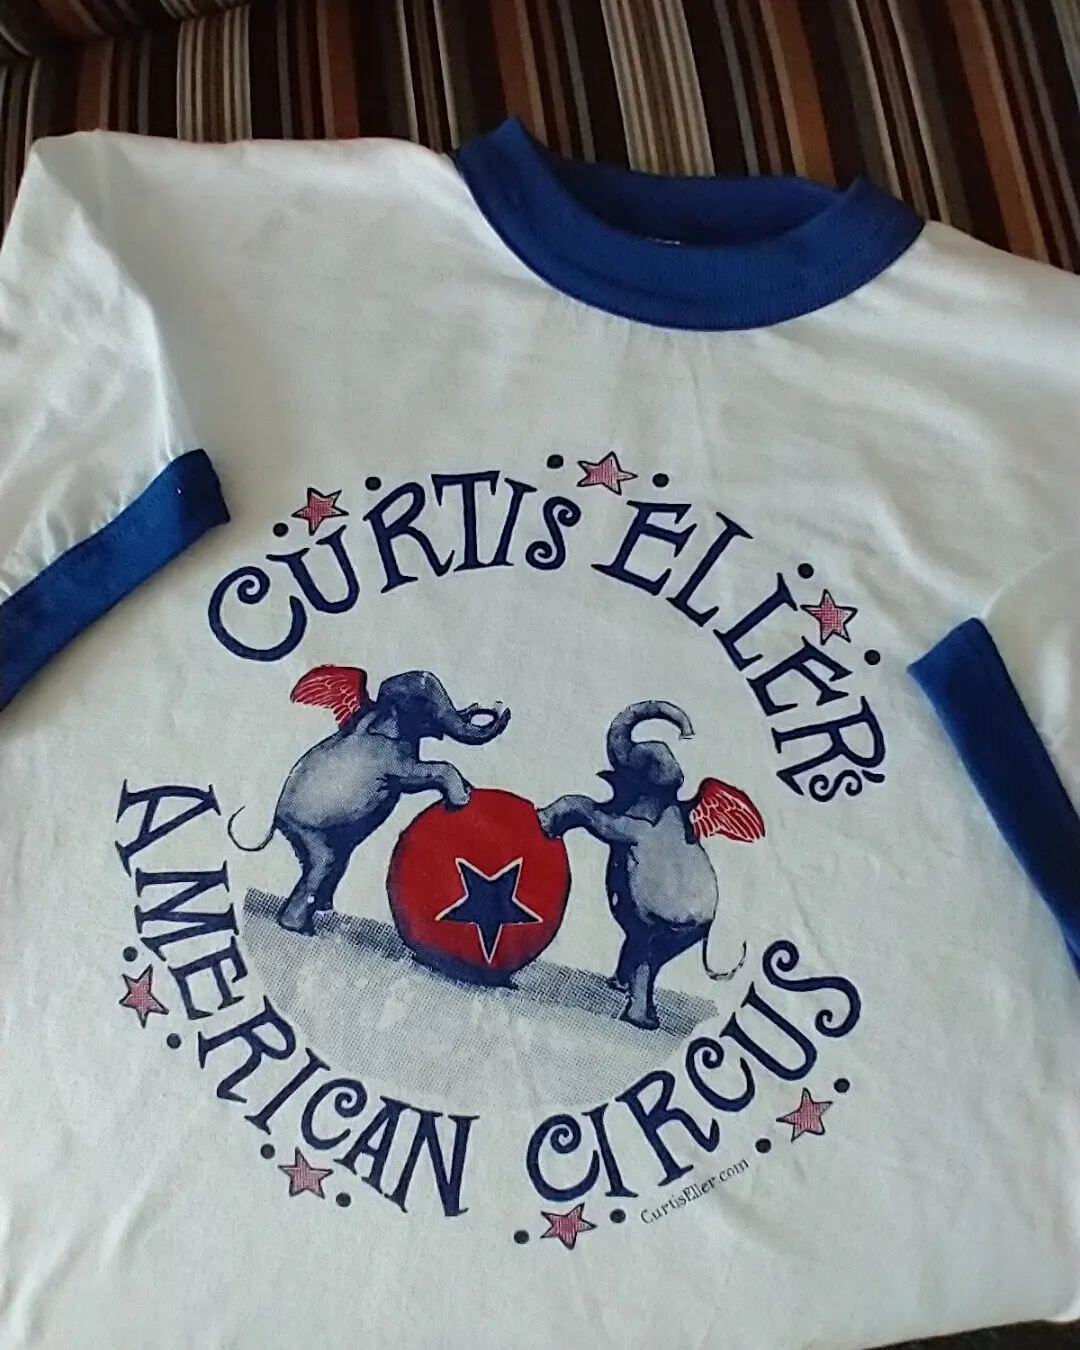 Dig these groovy new American Circus t-shirts! Hot off the press just in time for my UK tour! 🪕🐘
---
#curtiseller #curtisellersamericancircus #durhamshortrunshirts #tshirt #tshirtdesign #elephant #circus #ringertee #uktour @curtisellermusic @durham